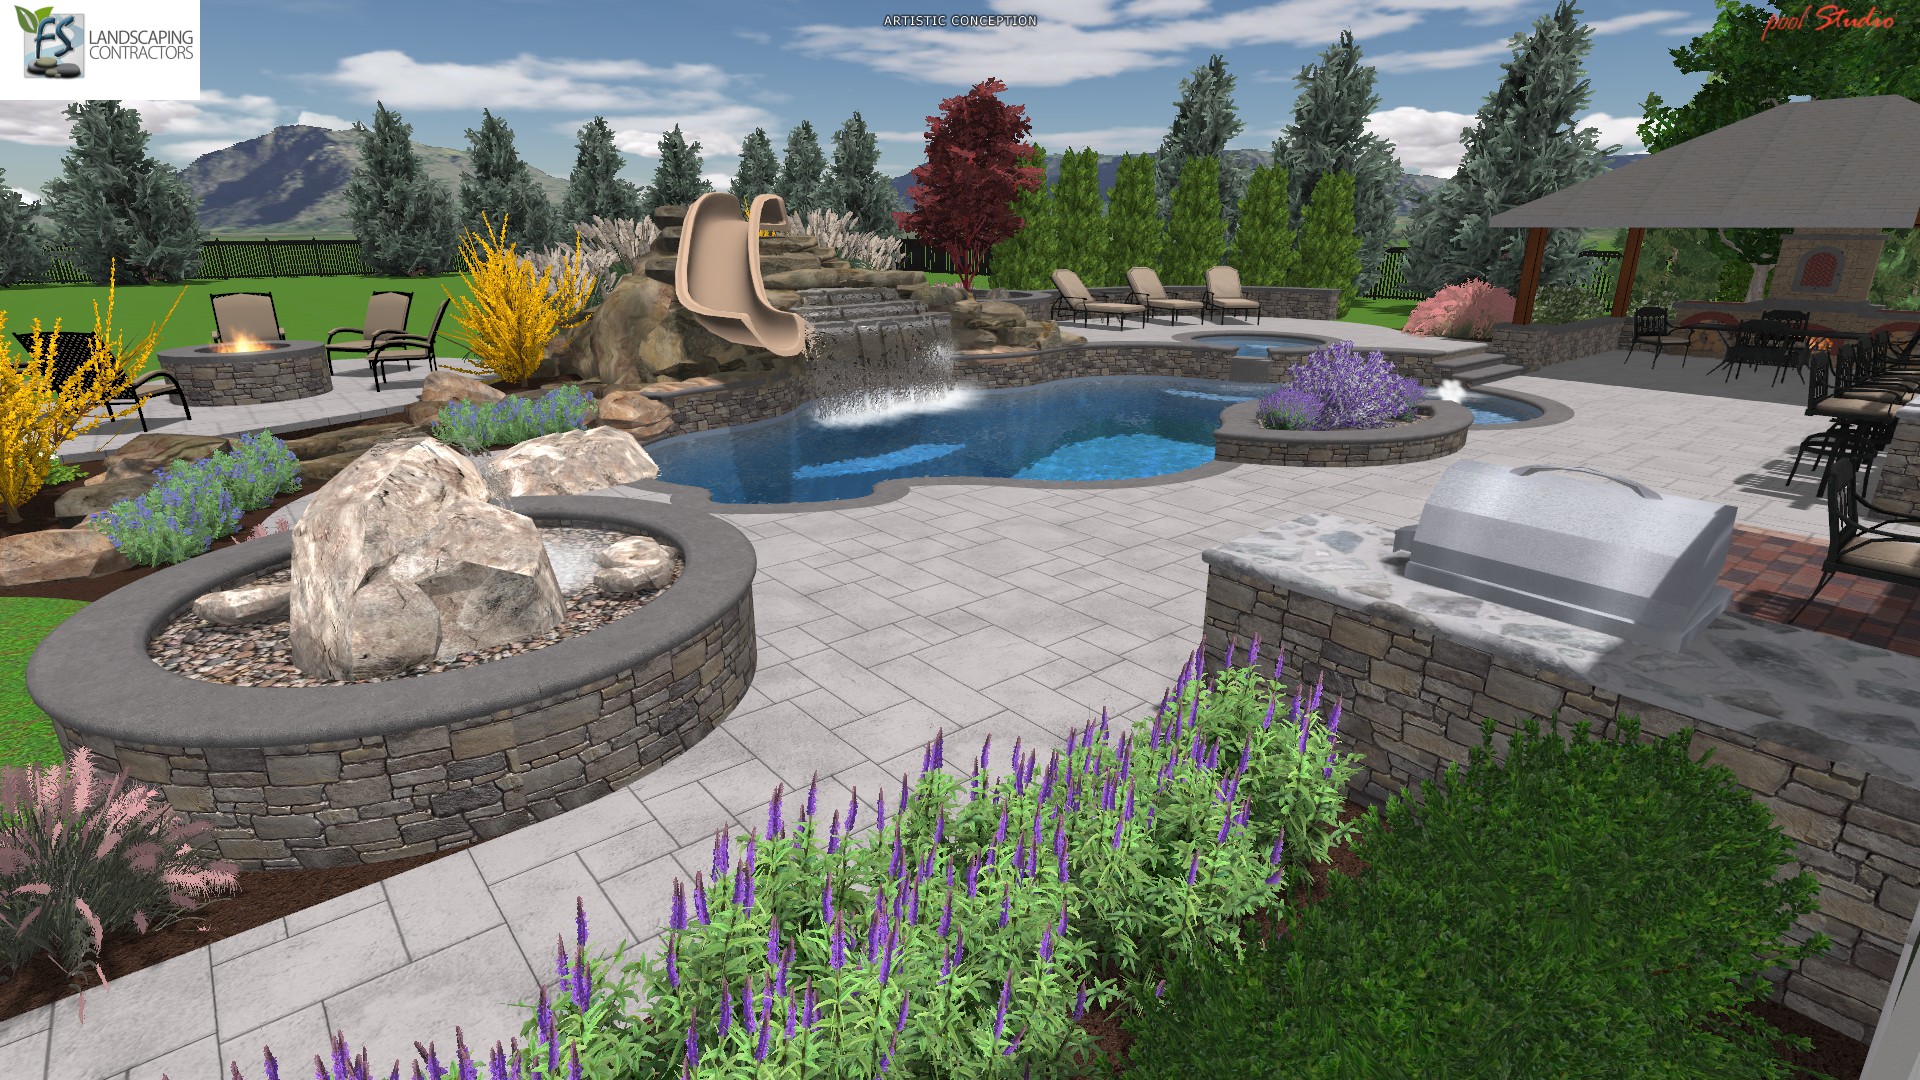 swimming pools archive - landscaping company nj & pa